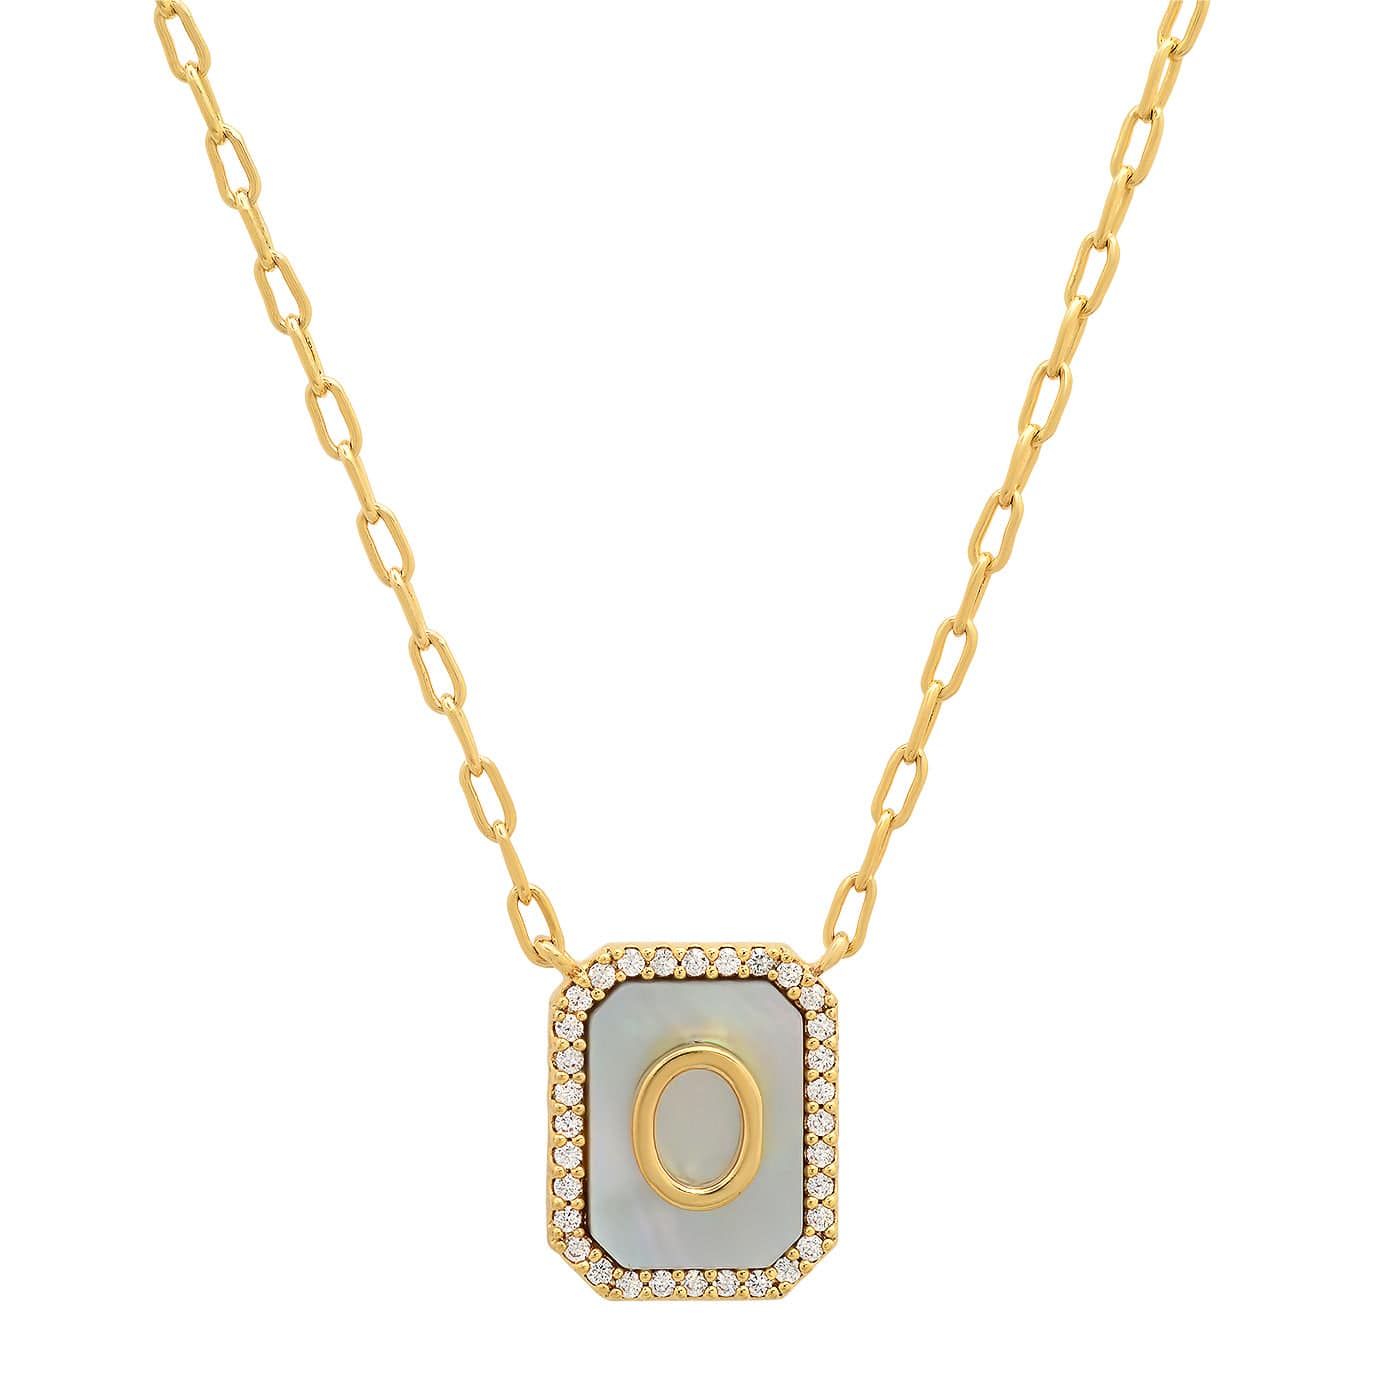 TAI JEWELRY Necklace O Mother Of Pearl Monogram Necklace